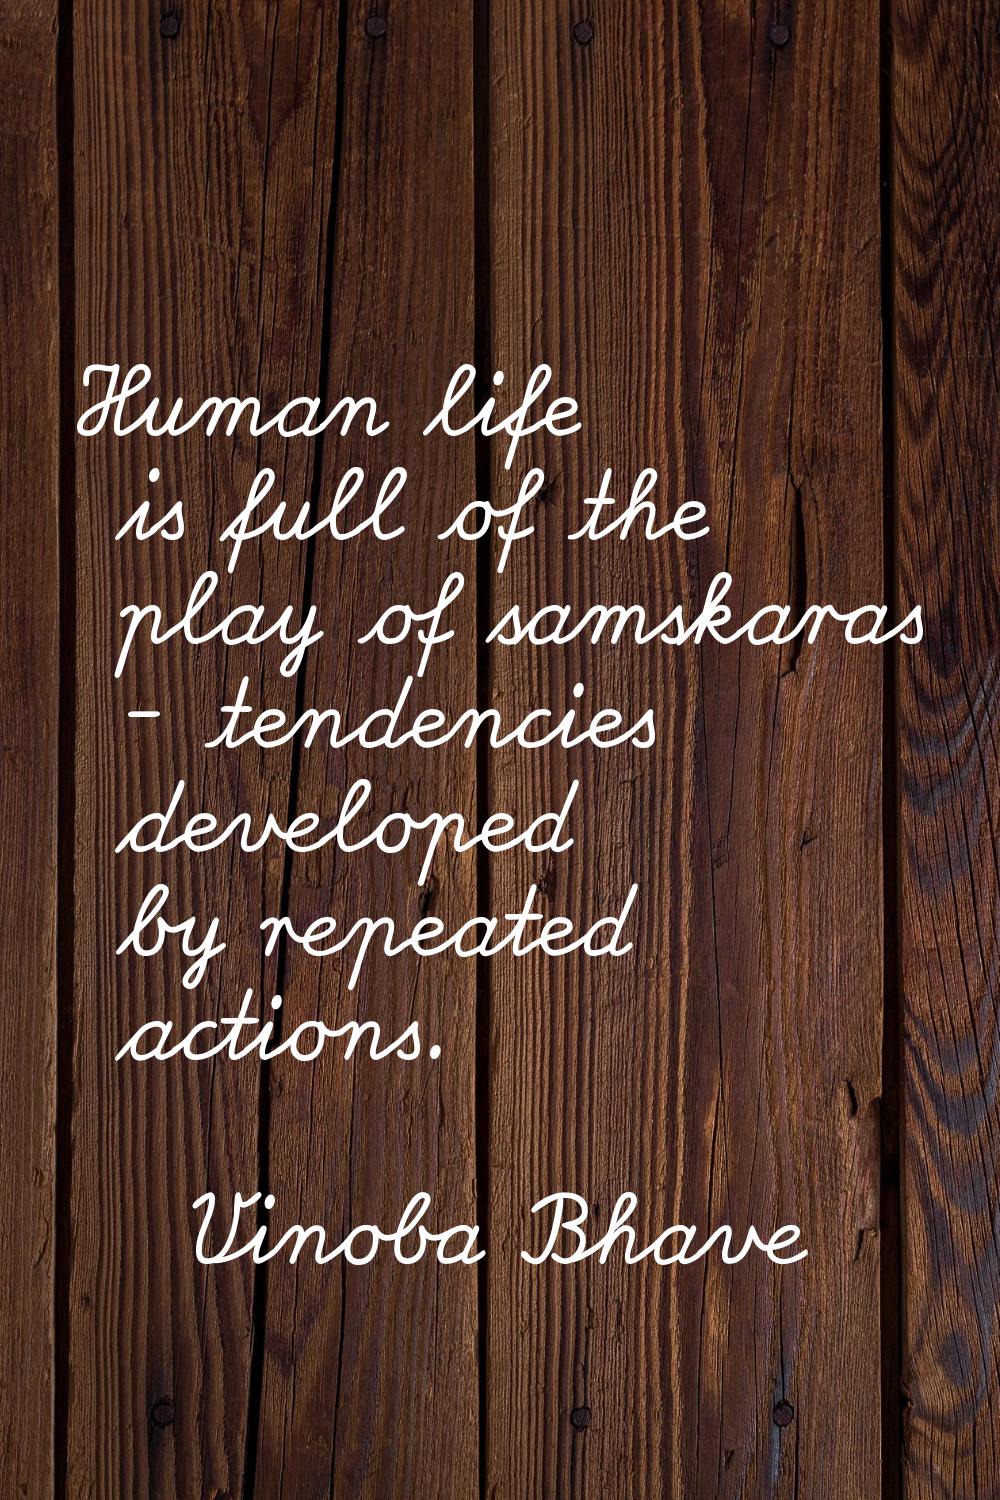 Human life is full of the play of samskaras - tendencies developed by repeated actions.